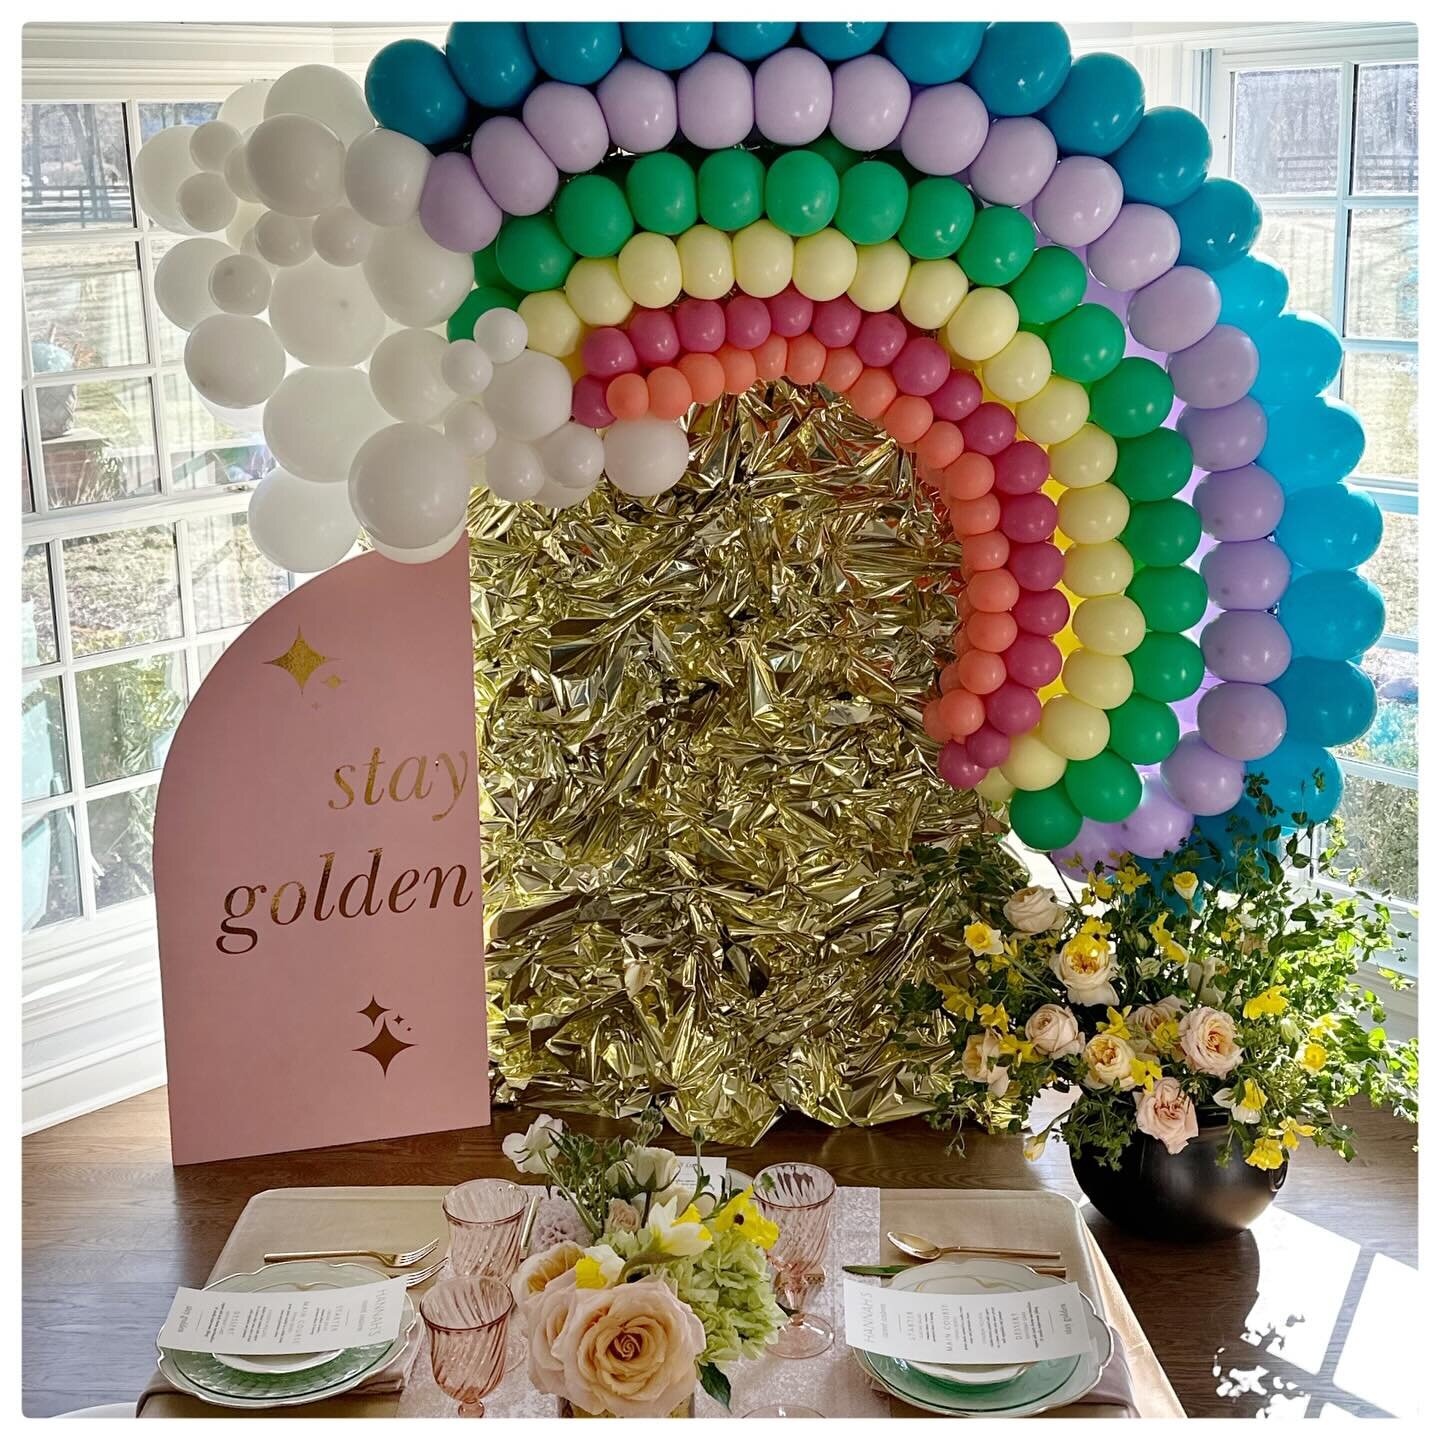 let&rsquo;s make this week full of sunshine and rainbows #rainbow #ballooninstallation #sparkleandtwine #backdrop #sweetsixteen #goldenbirthday #stpatricksday #dinnerparty #potofgold #eventdecor #eventstylist #chicagoevents #elliestyled 🌈